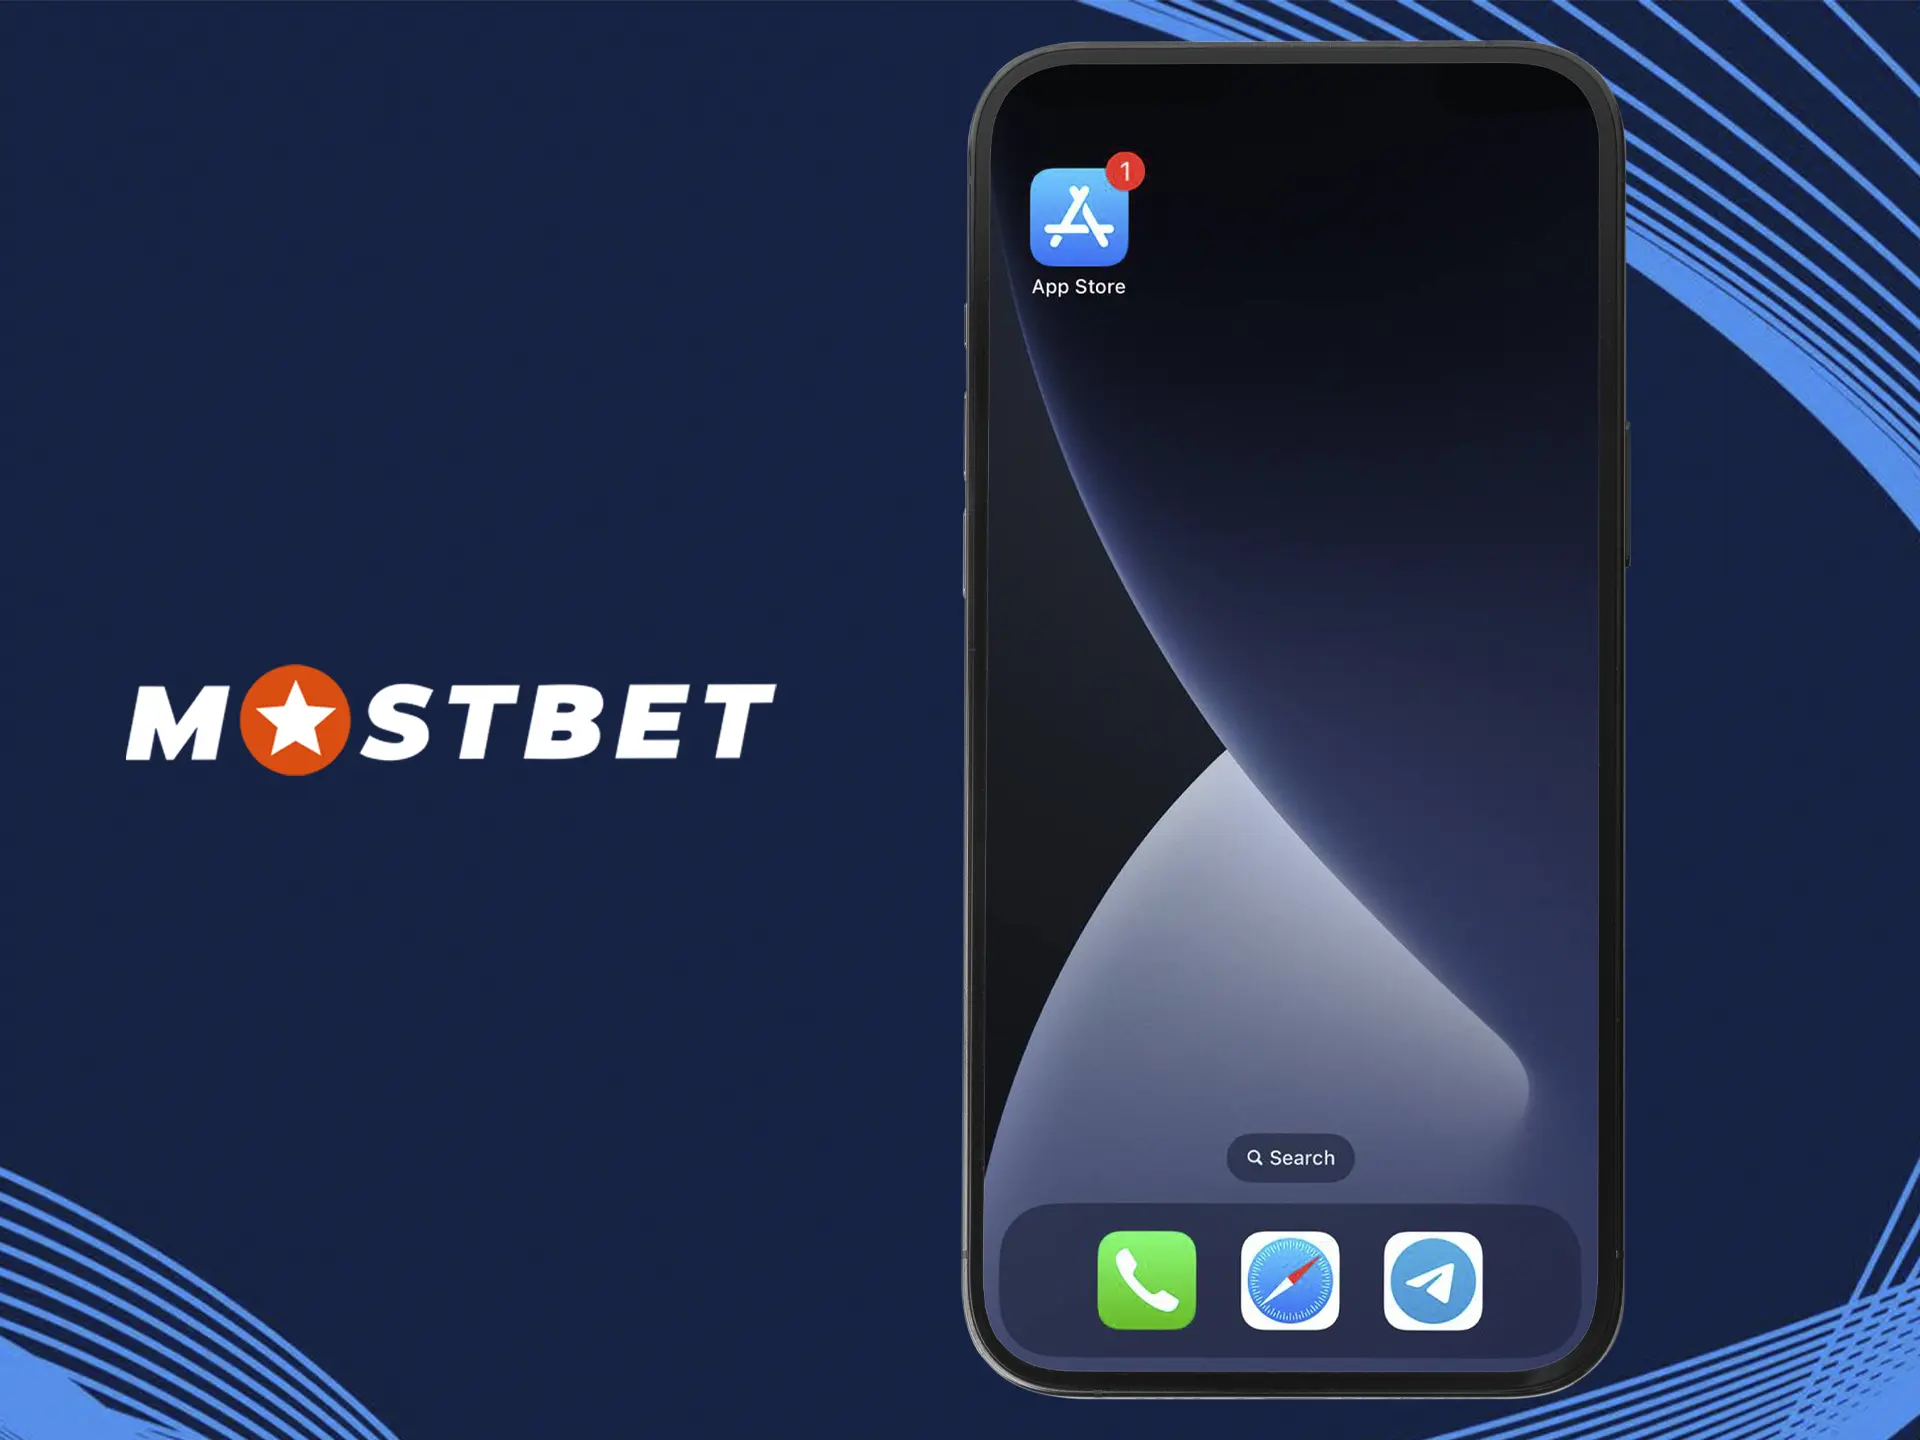 To install the Mostbet app, launch the app store on your device.